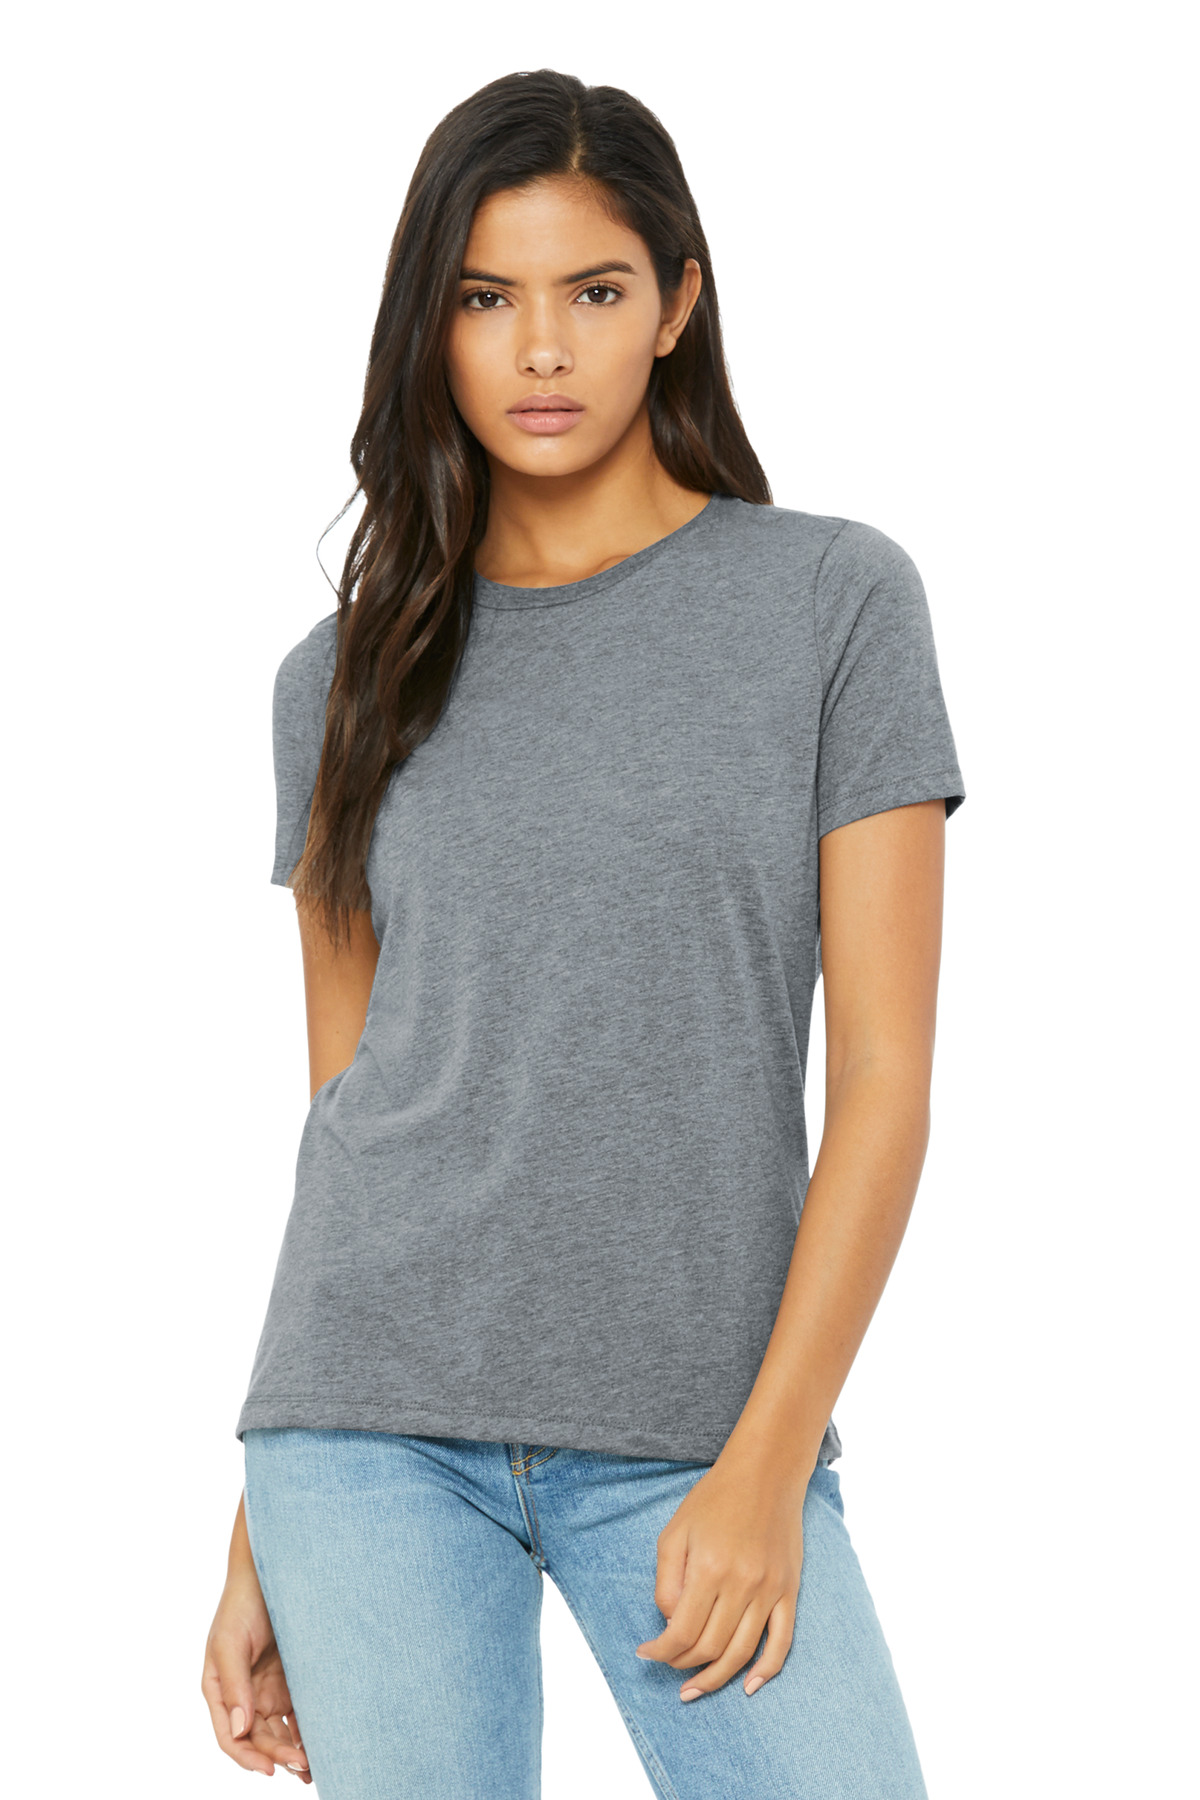 BELLA+CANVAS Womens Relaxed Triblend Tee BC6413